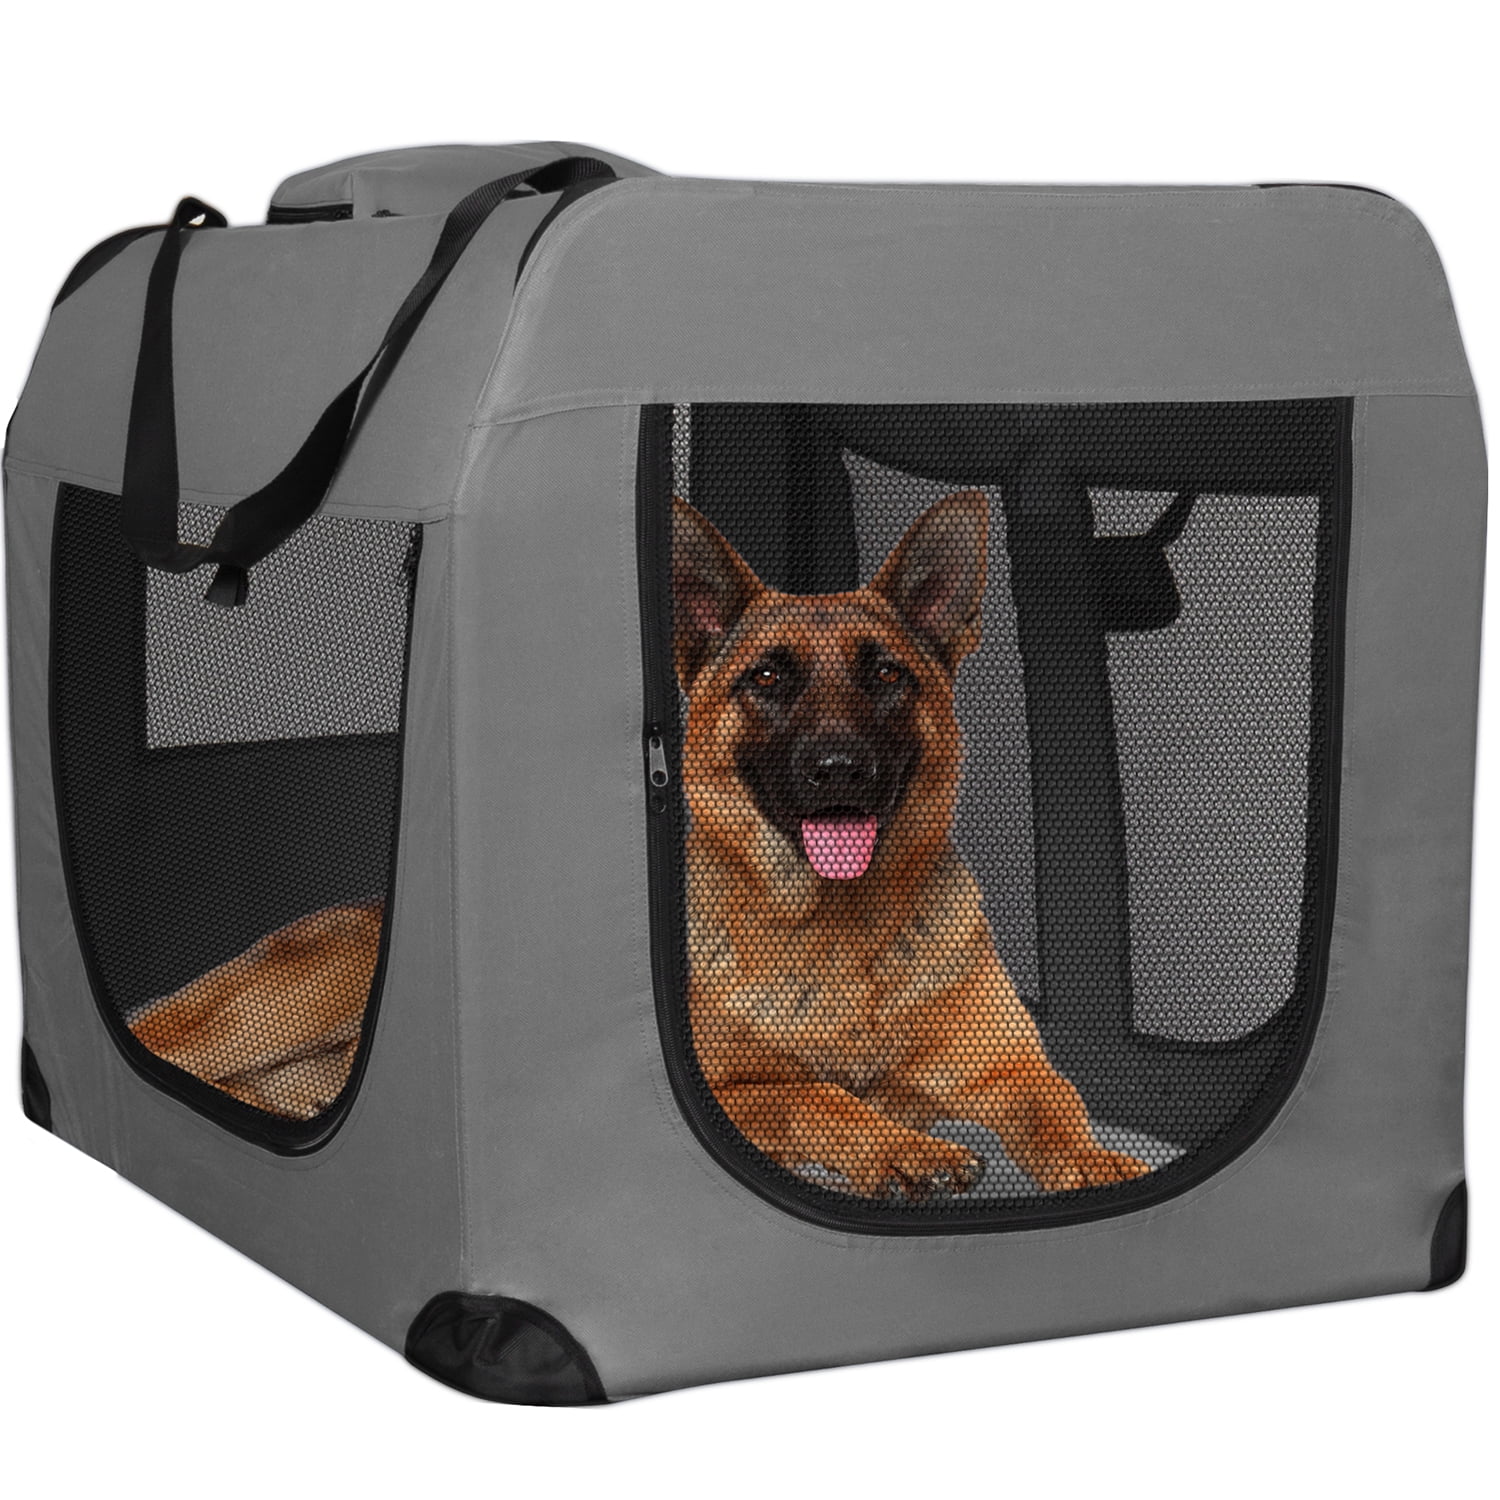 Paws & Pals Pet Carrier Crate Premium Soft-Sided Foldable for Dogs 